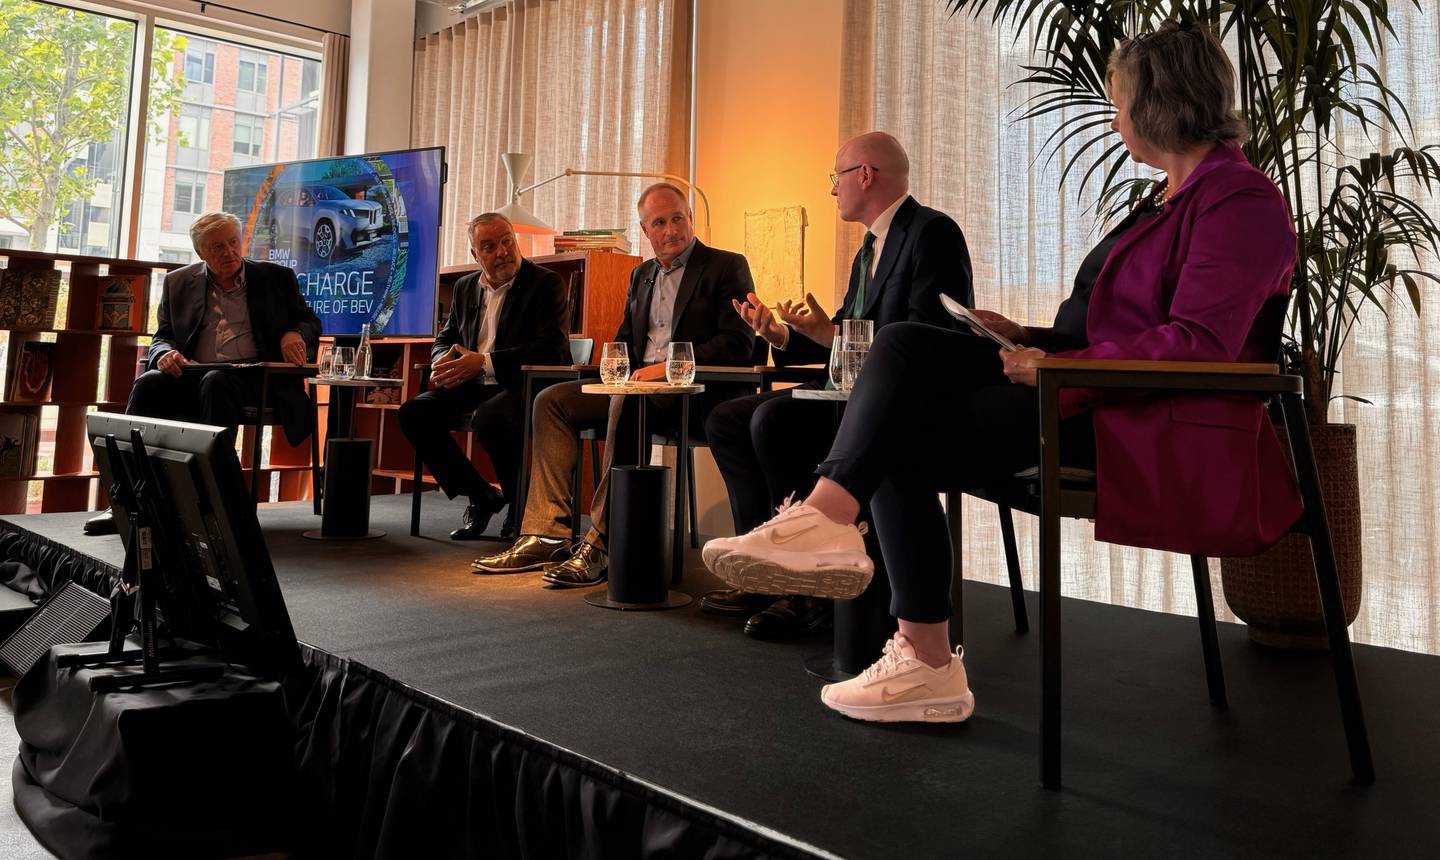 Led by broadcaster Pat Kenny, the panel included Brian Merrigan, CEO of BMW Financial Services Ireland, Corporate Communications Director at BMW, Simi director general Brian Cooke and Helen Westby, MD of BMW Ireland.